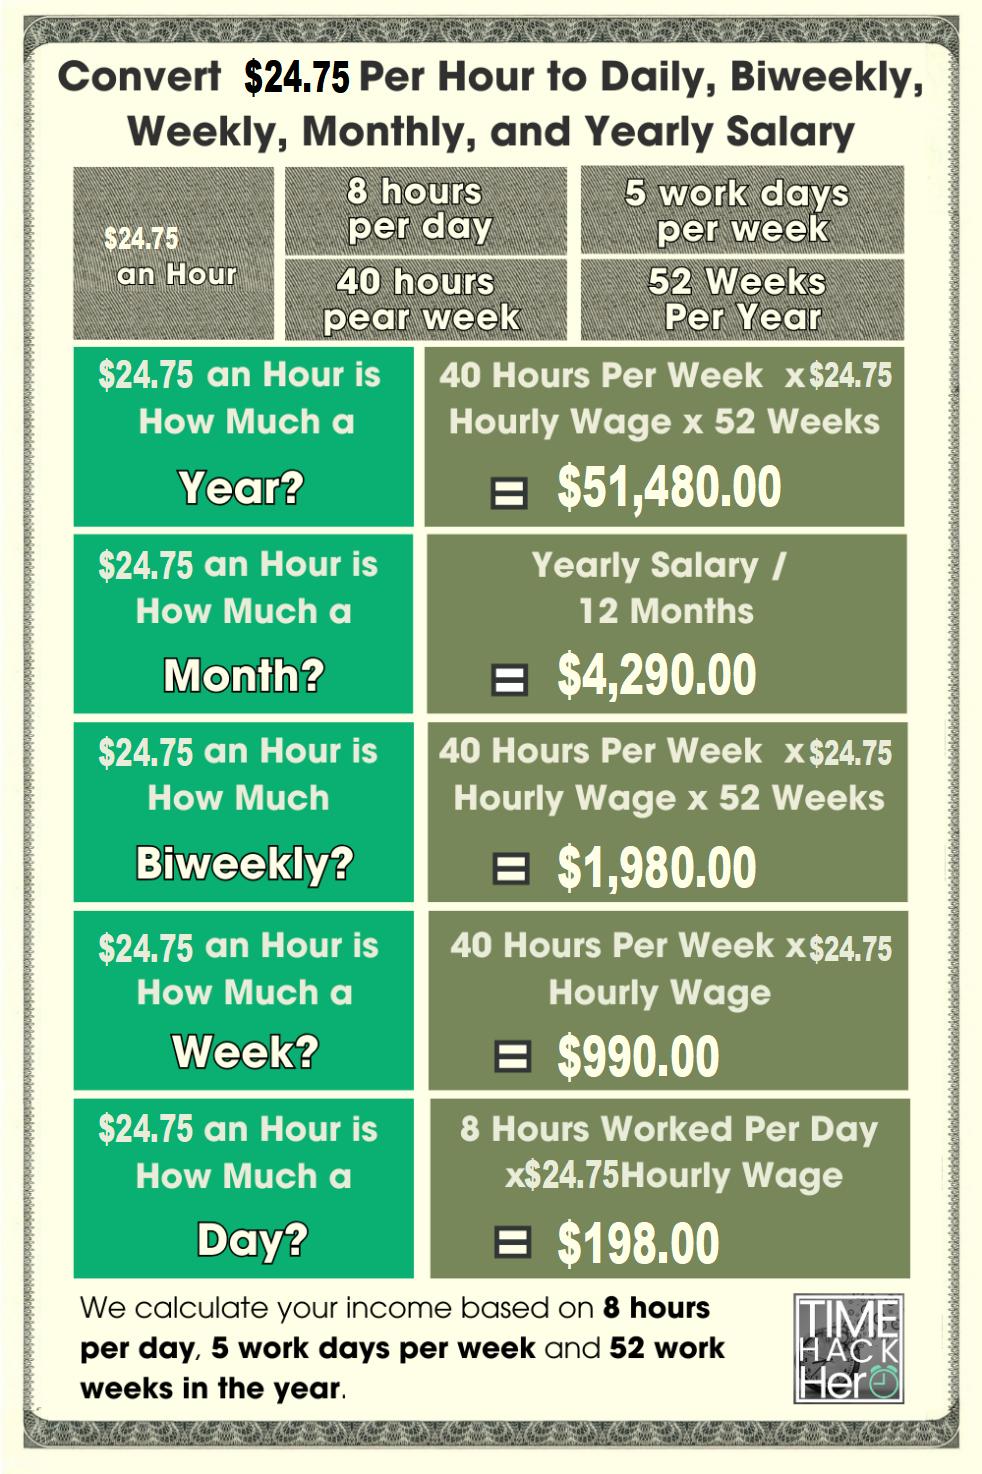 Convert $24.75 Per Hour to Weekly, Monthly, and Yearly Salary